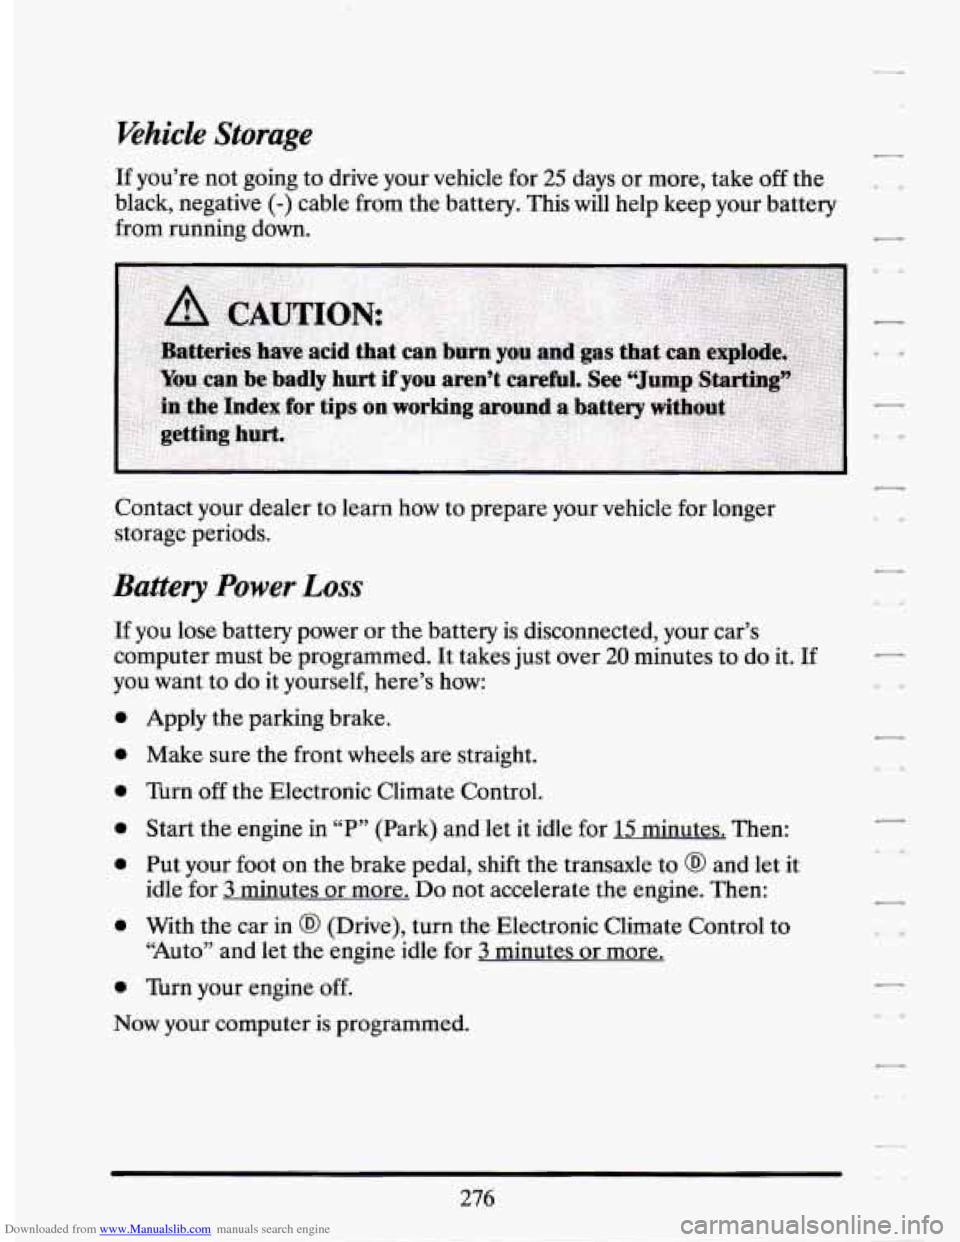 CADILLAC SEVILLE 1994 4.G Owners Manual Downloaded from www.Manualslib.com manuals search engine Vehicle  Storage 
If you’re  not going  to drive  your  vehicle  for 25 days or more, take off the 
black,  negative 
(-) cable  from  the ba